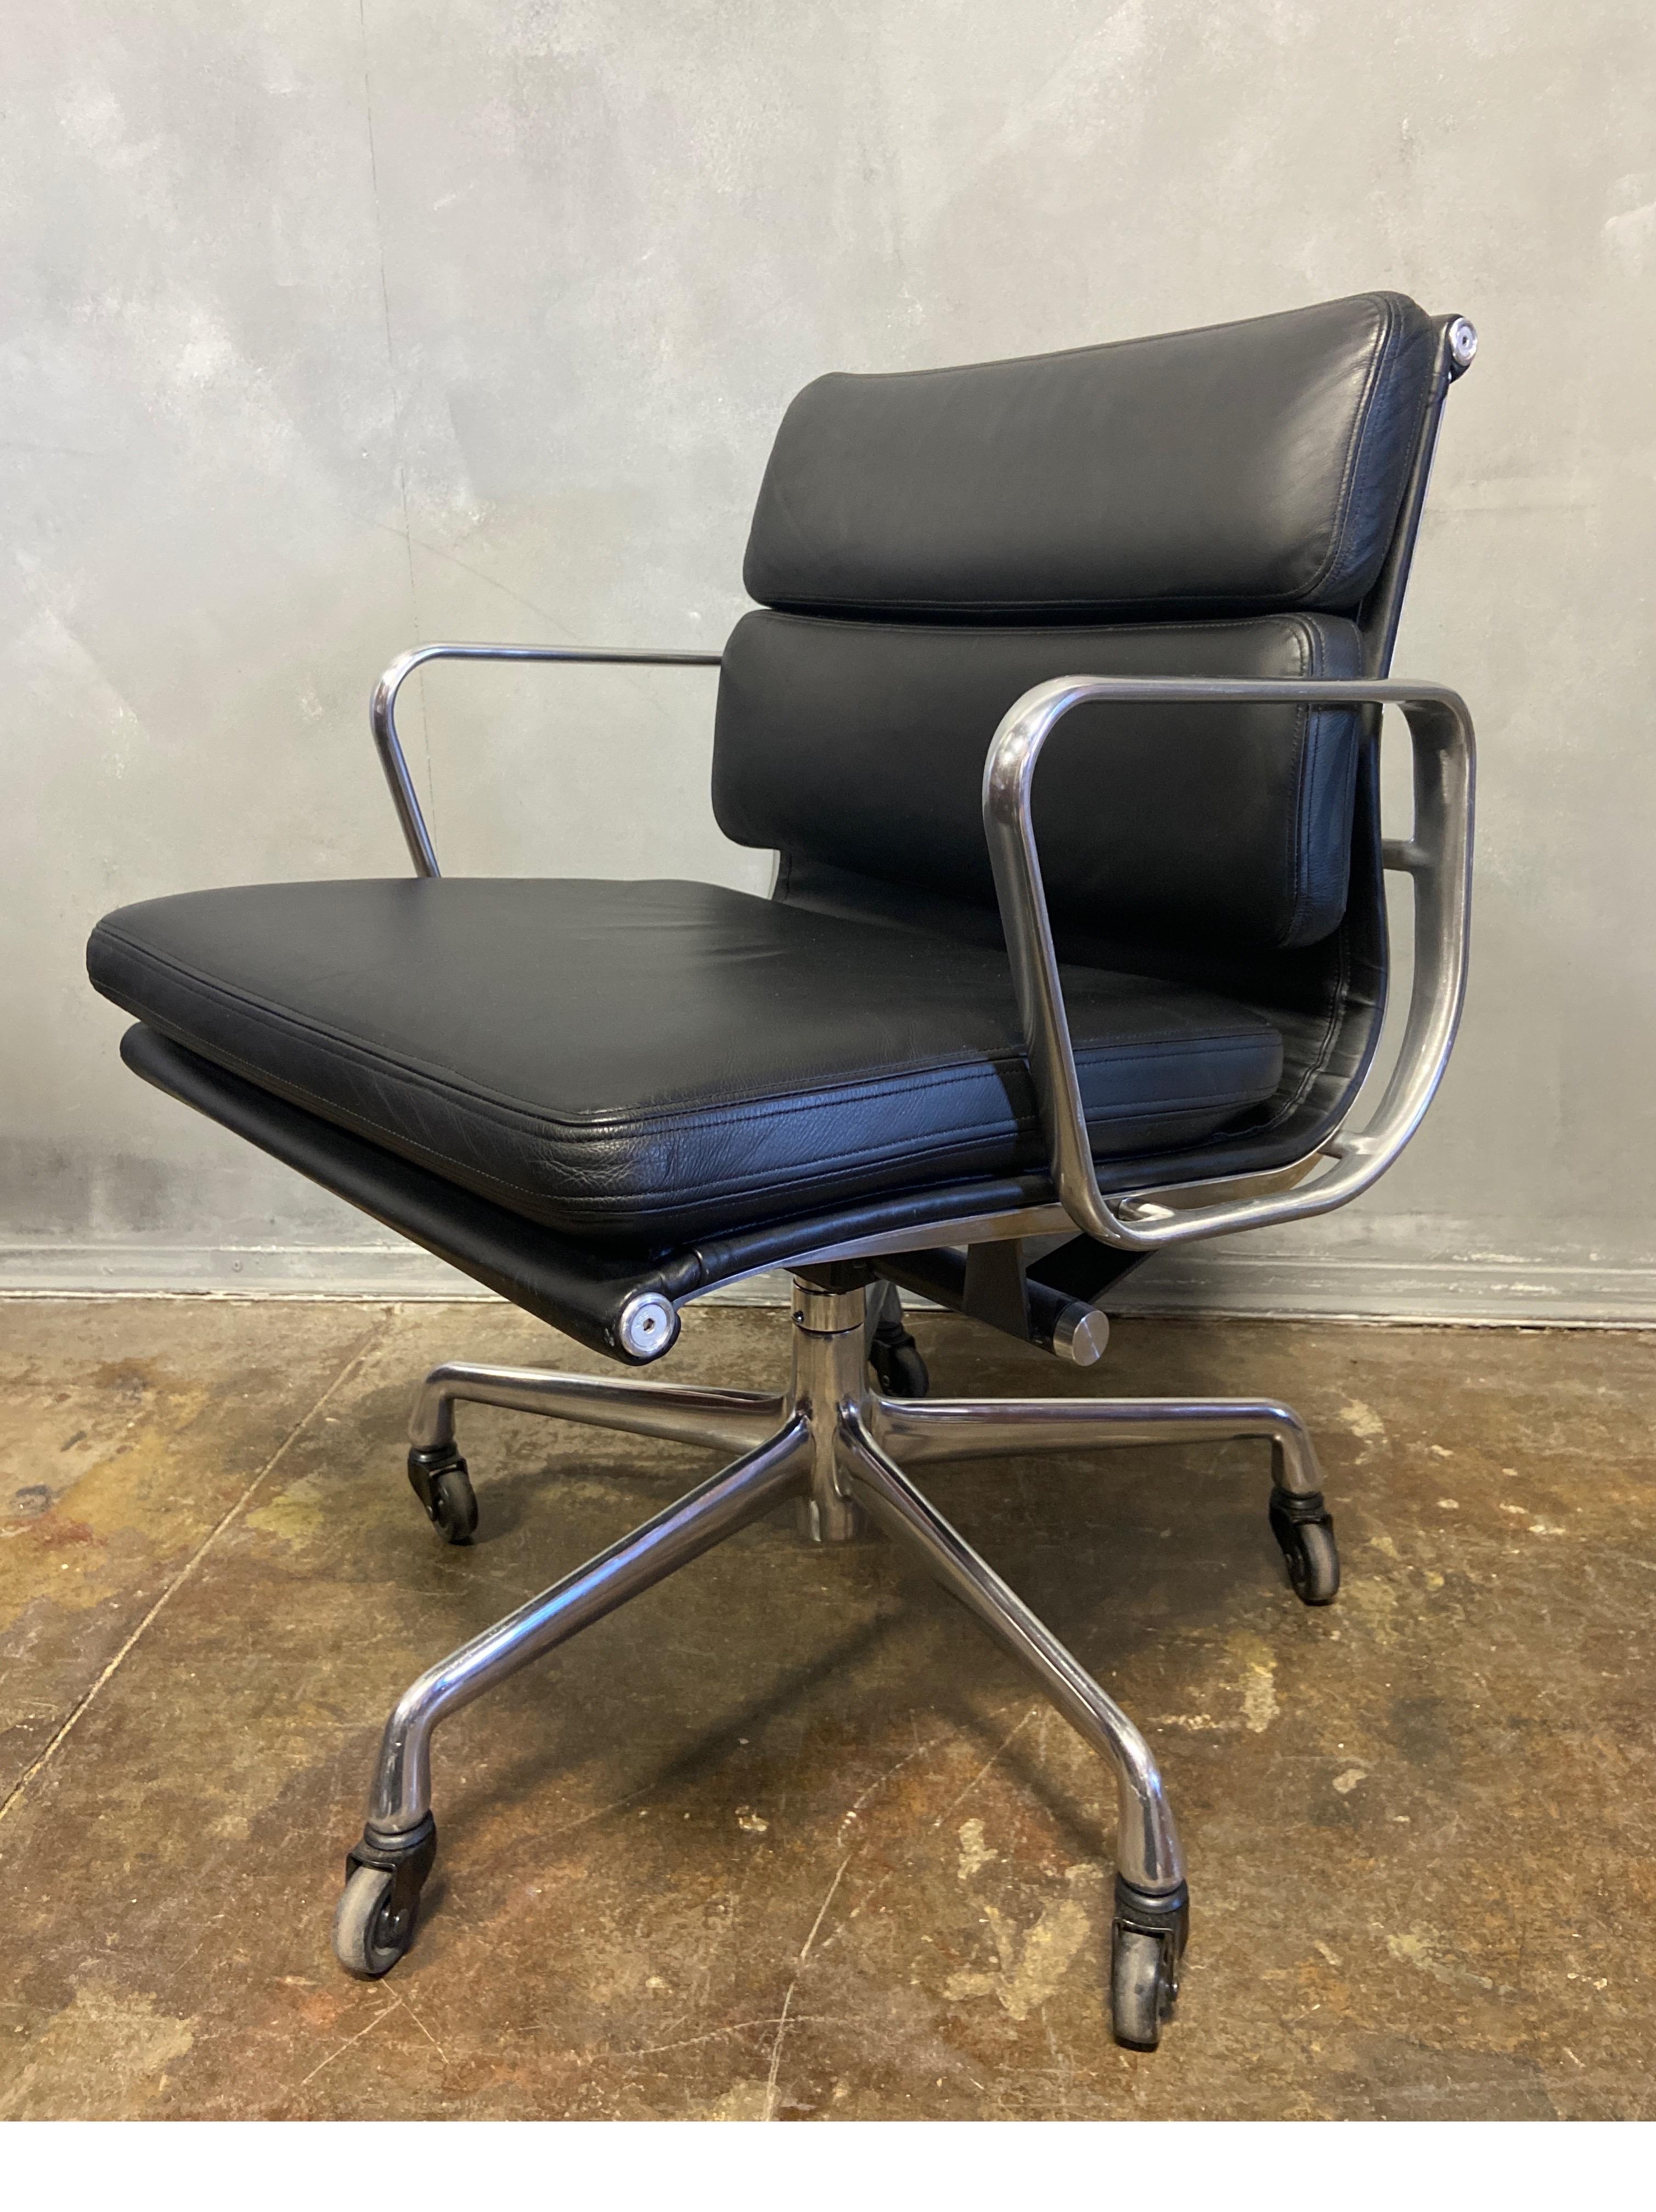 For your consideration is this authentic Eames for Herman Miller vintage soft pad chair in black leather in exceptional good vintage condition. Adjustable tilt and height. These authentic vintage examples are icons of Mid-Century Modern design. The